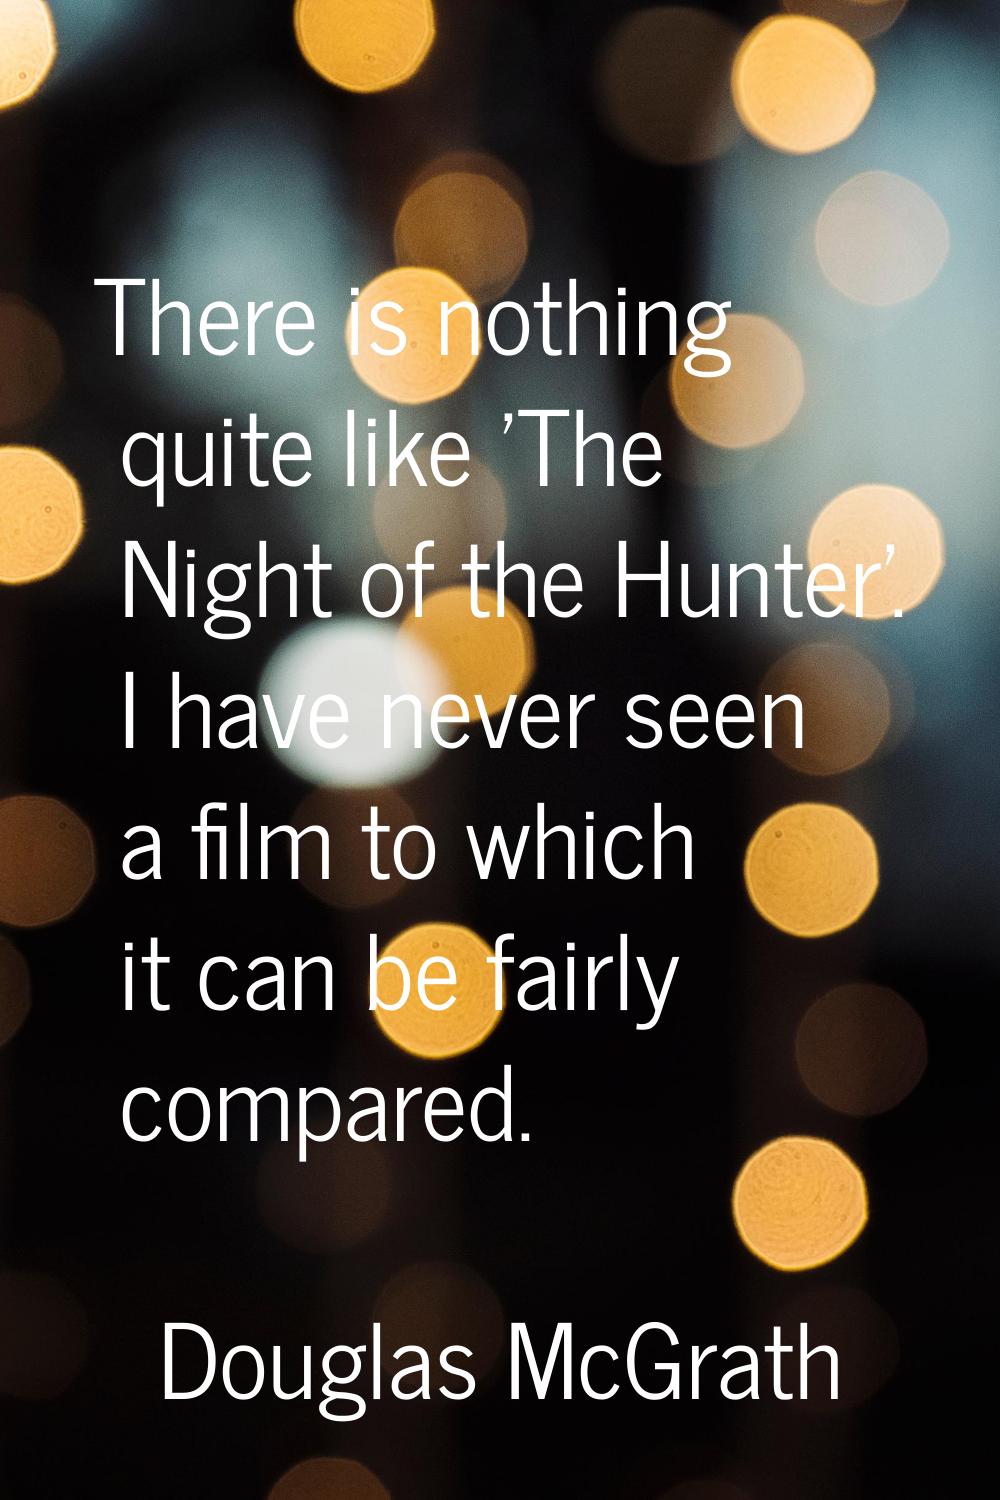 There is nothing quite like 'The Night of the Hunter'. I have never seen a film to which it can be 